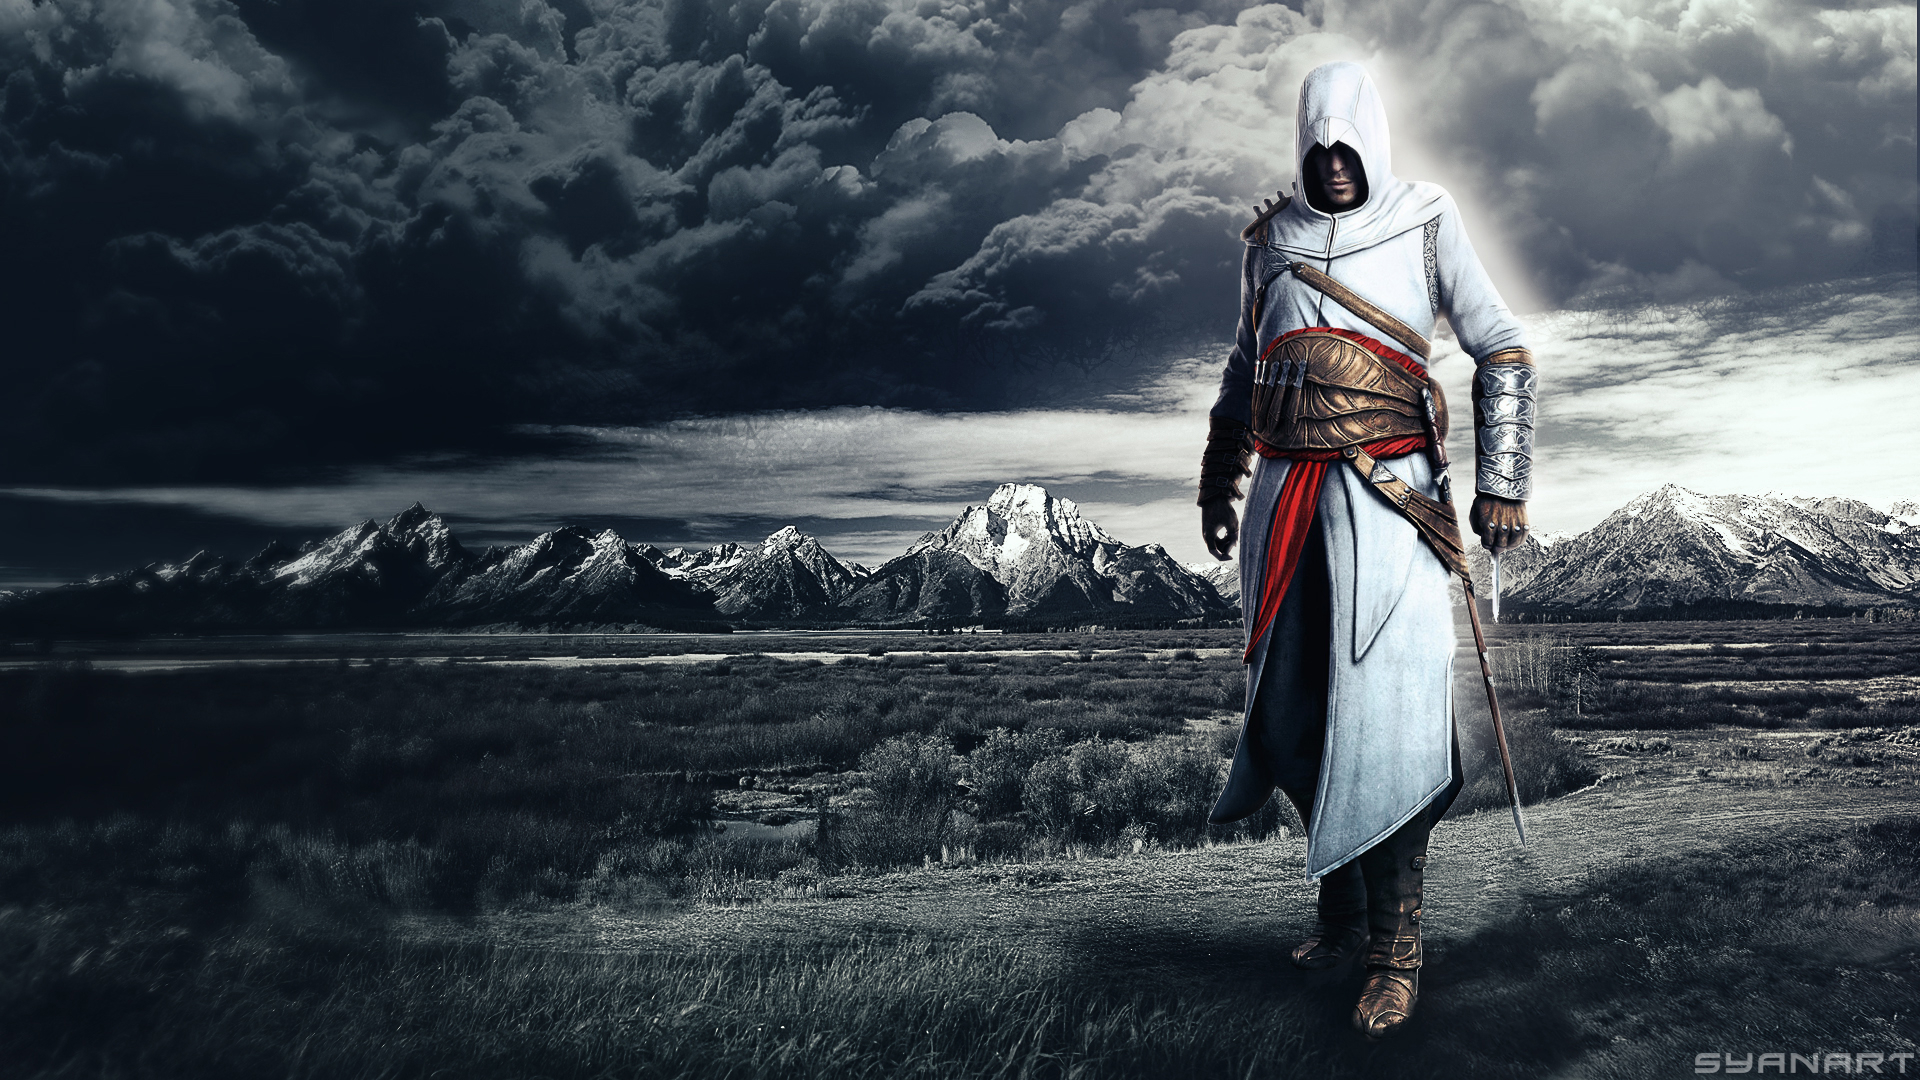 video game, assassin's creed, altair (assassin's creed)